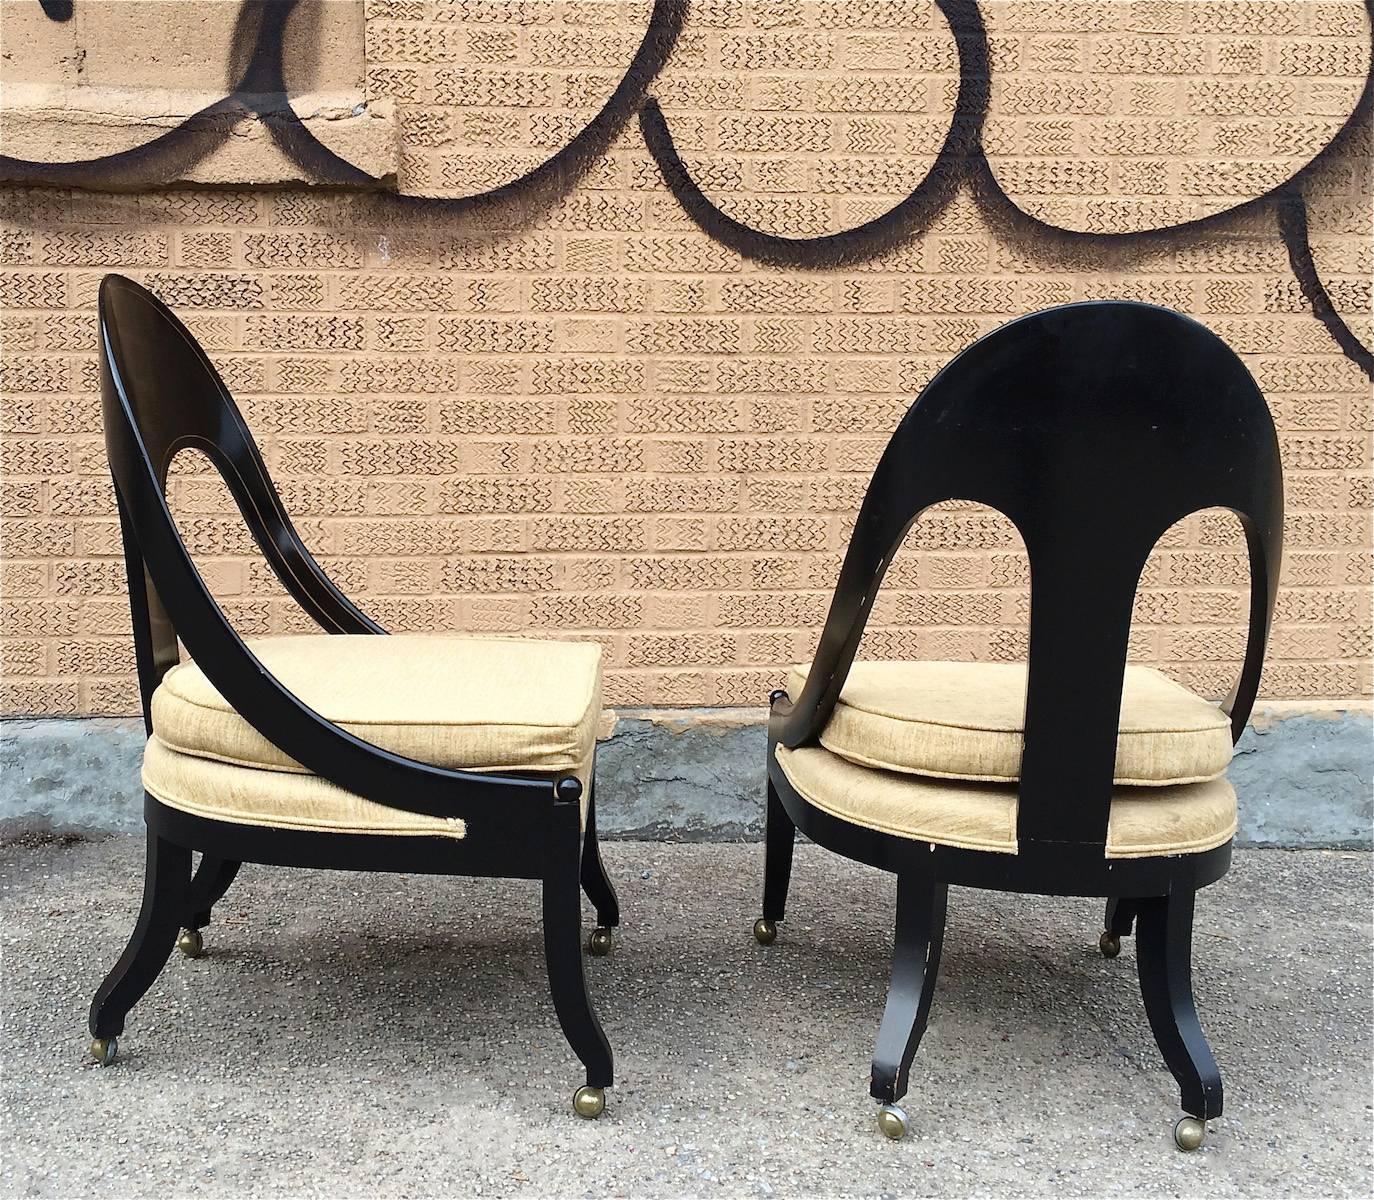 Lacquered Pair of Neoclassical Spoon Back Chairs in the Style of Michael Taylor for Baker